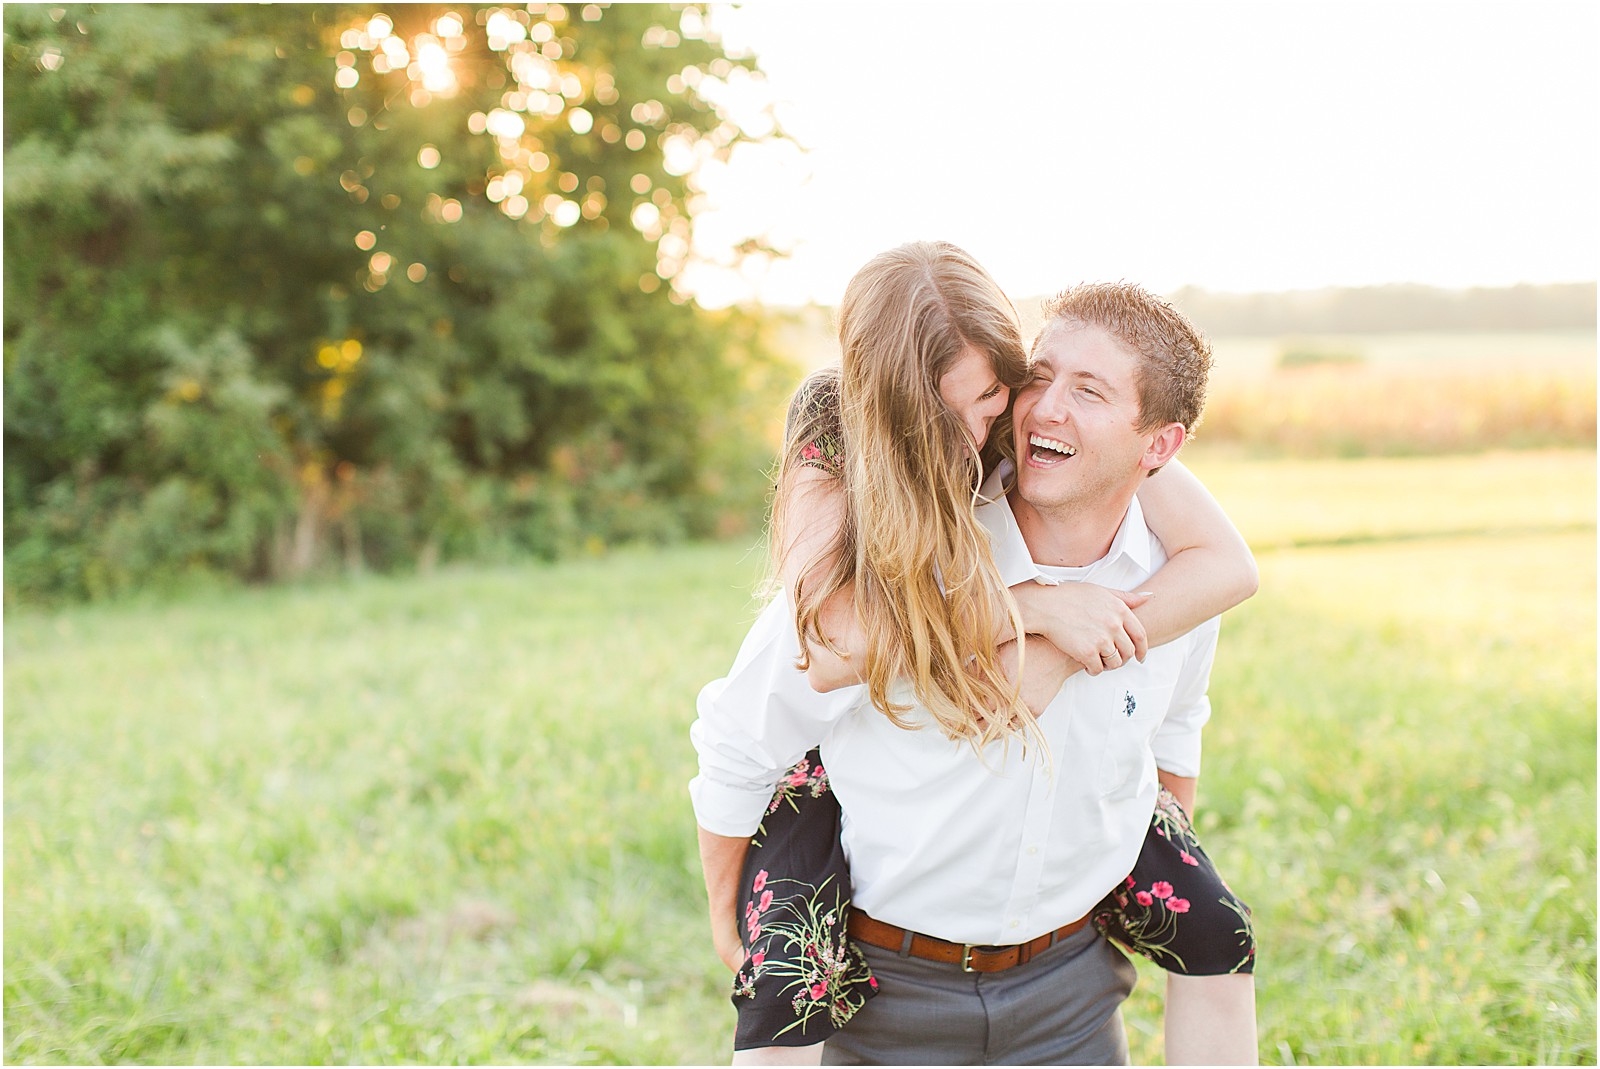 A Jasper Indiana Engagement Session | Tori and Kyle | Bret and Brandie Photography036.jpg